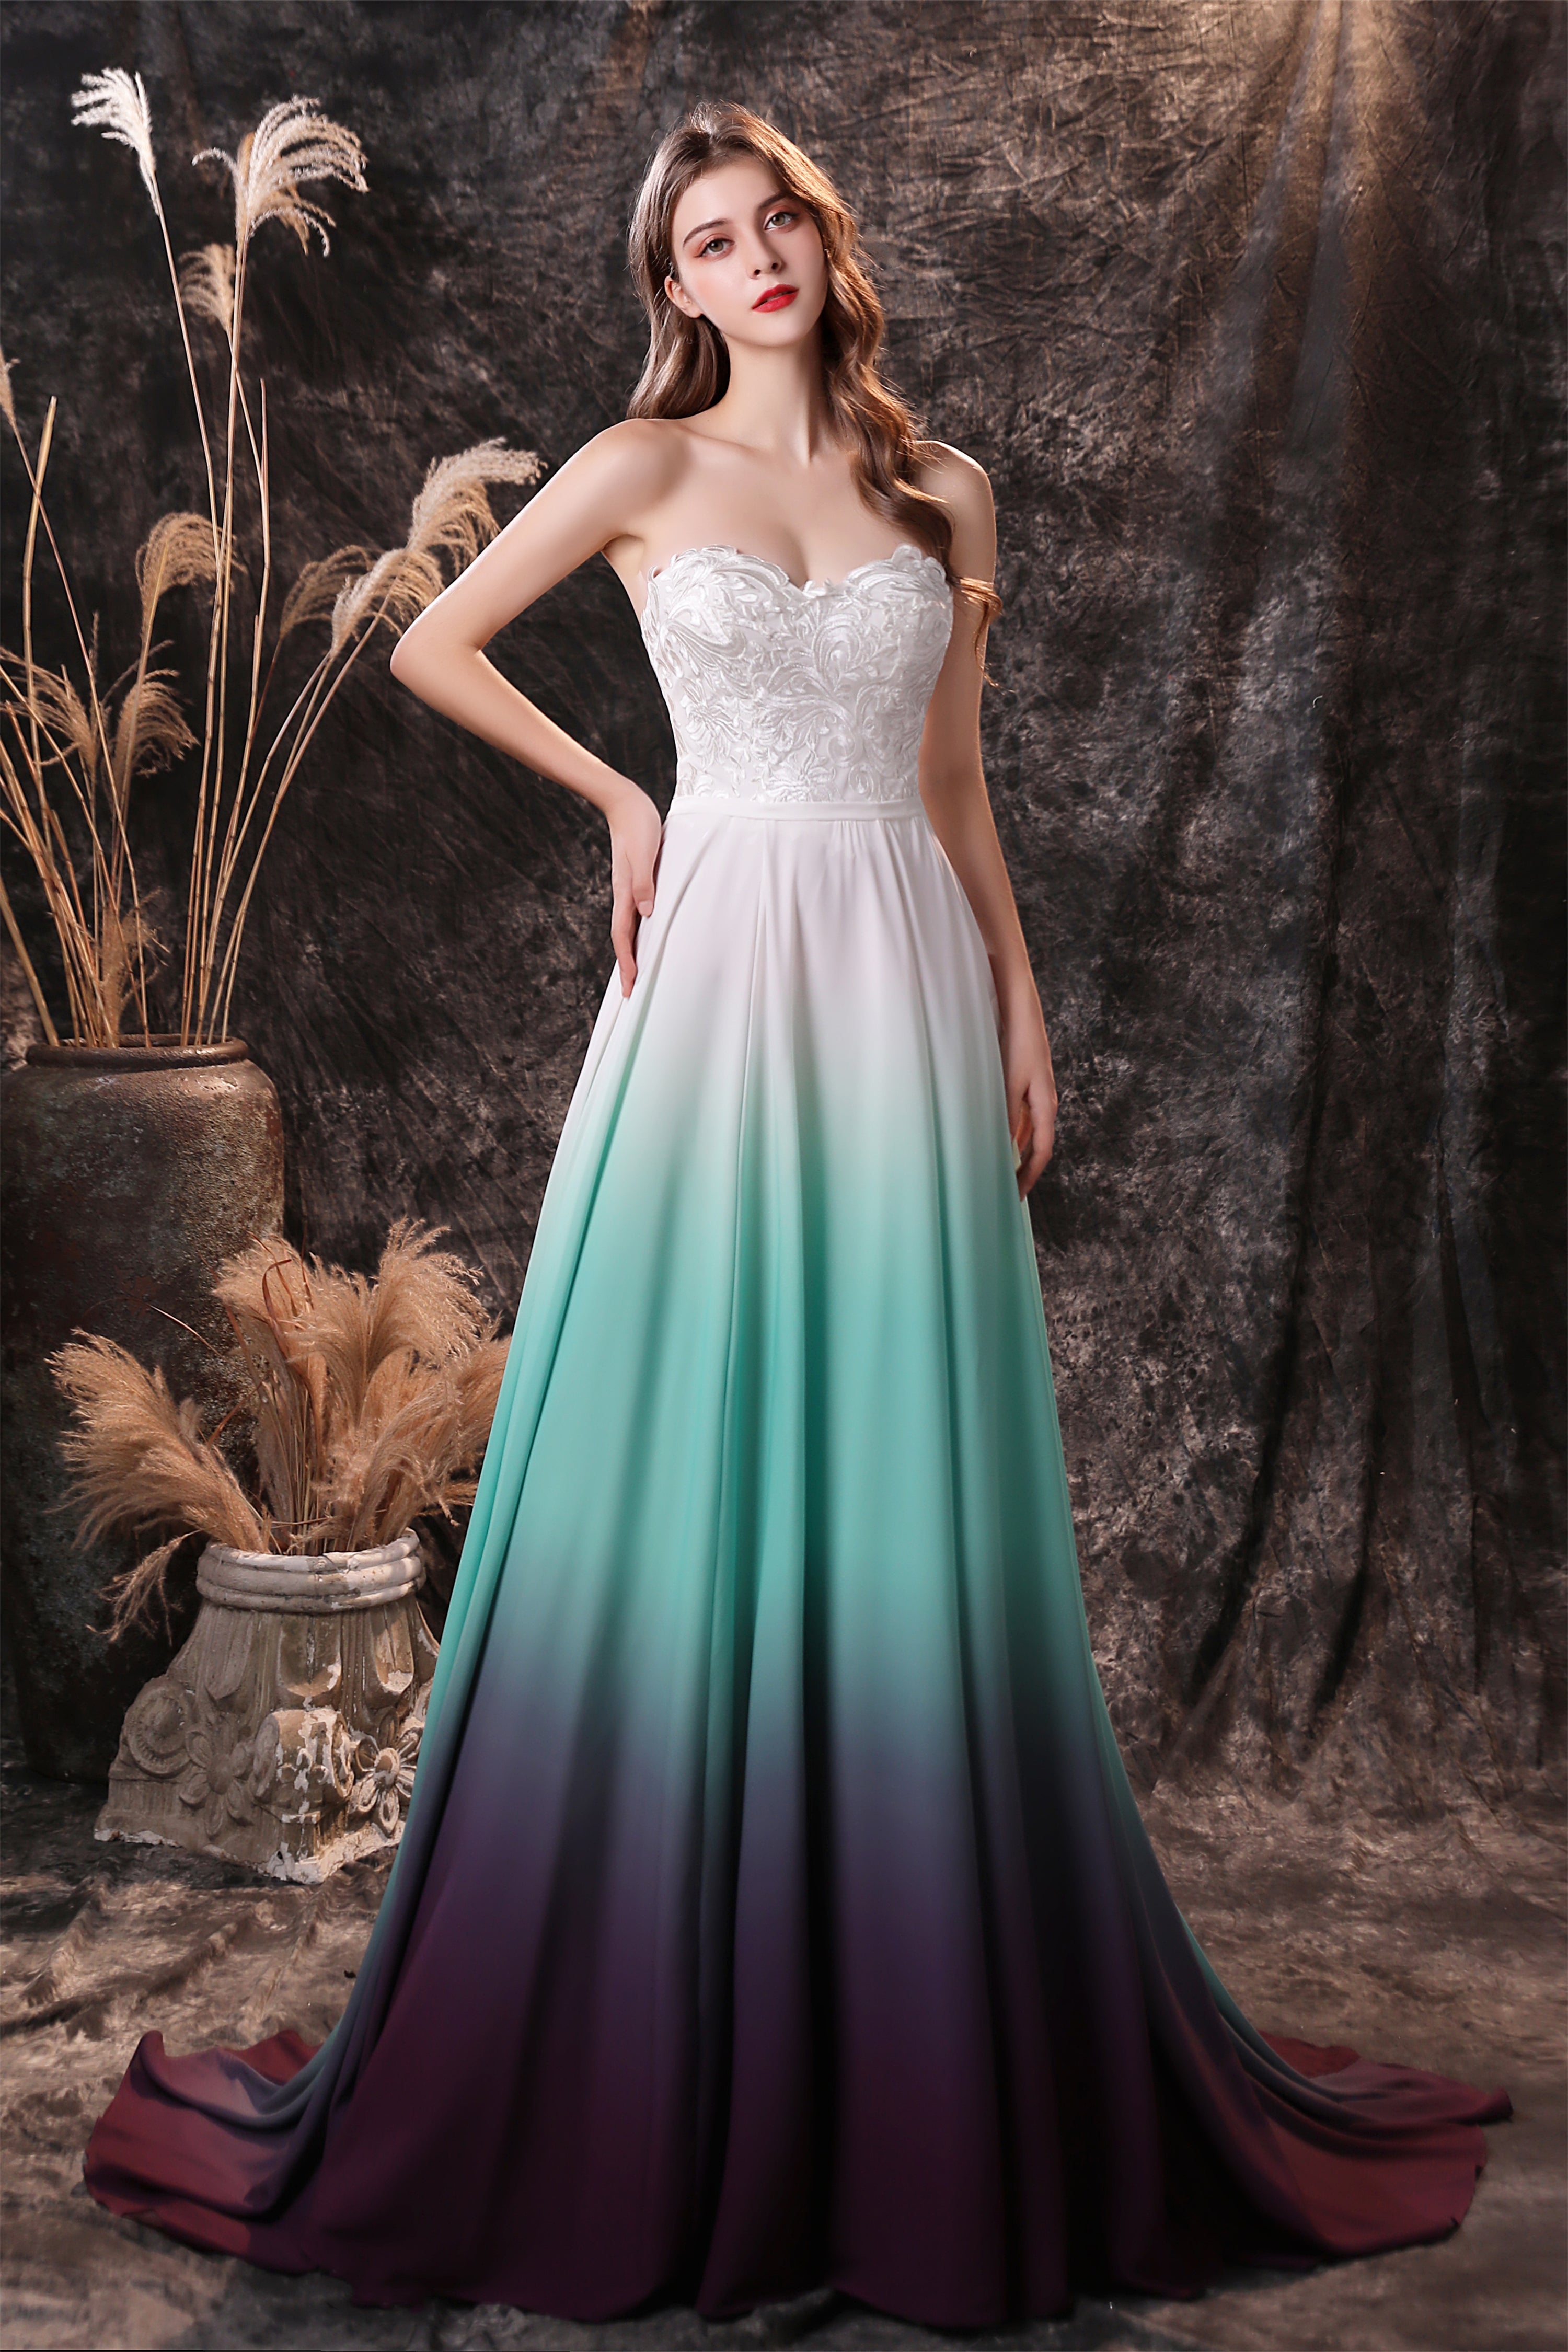 Bridesmaid Dress Convertible, A Line Strapless Sleeveless Appliques Ombre Silk Like Satin Sweep Train Prom Dresses